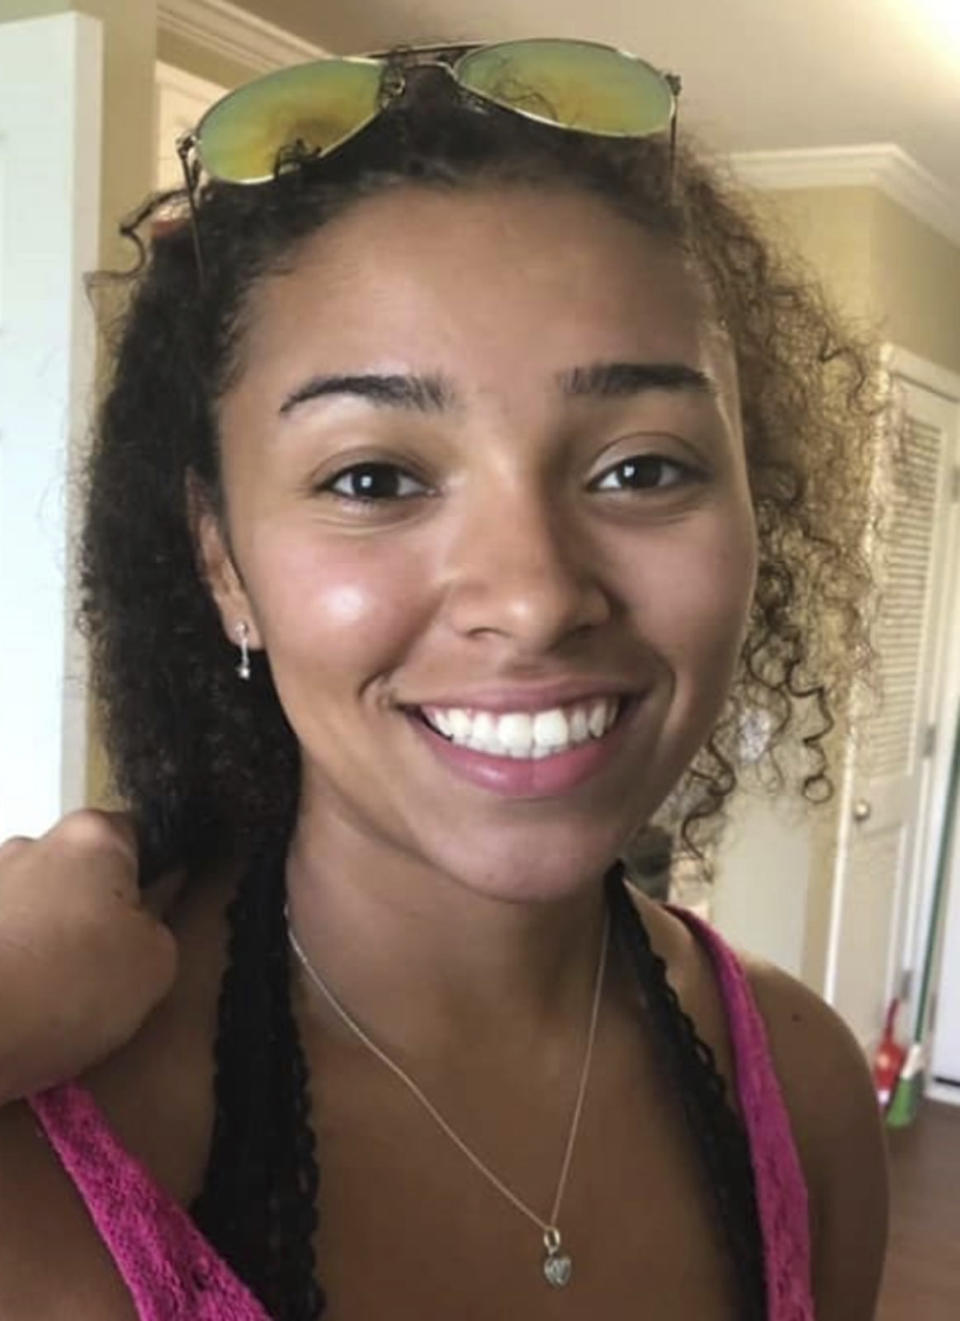 FILE - This undated file photo released by police in Auburn, Ala., shows Aniah Blanchard. Human remains discovered in a wooded area have been confirmed as belonging to Blanchard, a missing college student who was the stepdaughter of well-known UFC fighter, Walt Harris, Alabama authorities announced Wednesday, Nov. 27, 2019. (Auburn Police Division via AP, File)